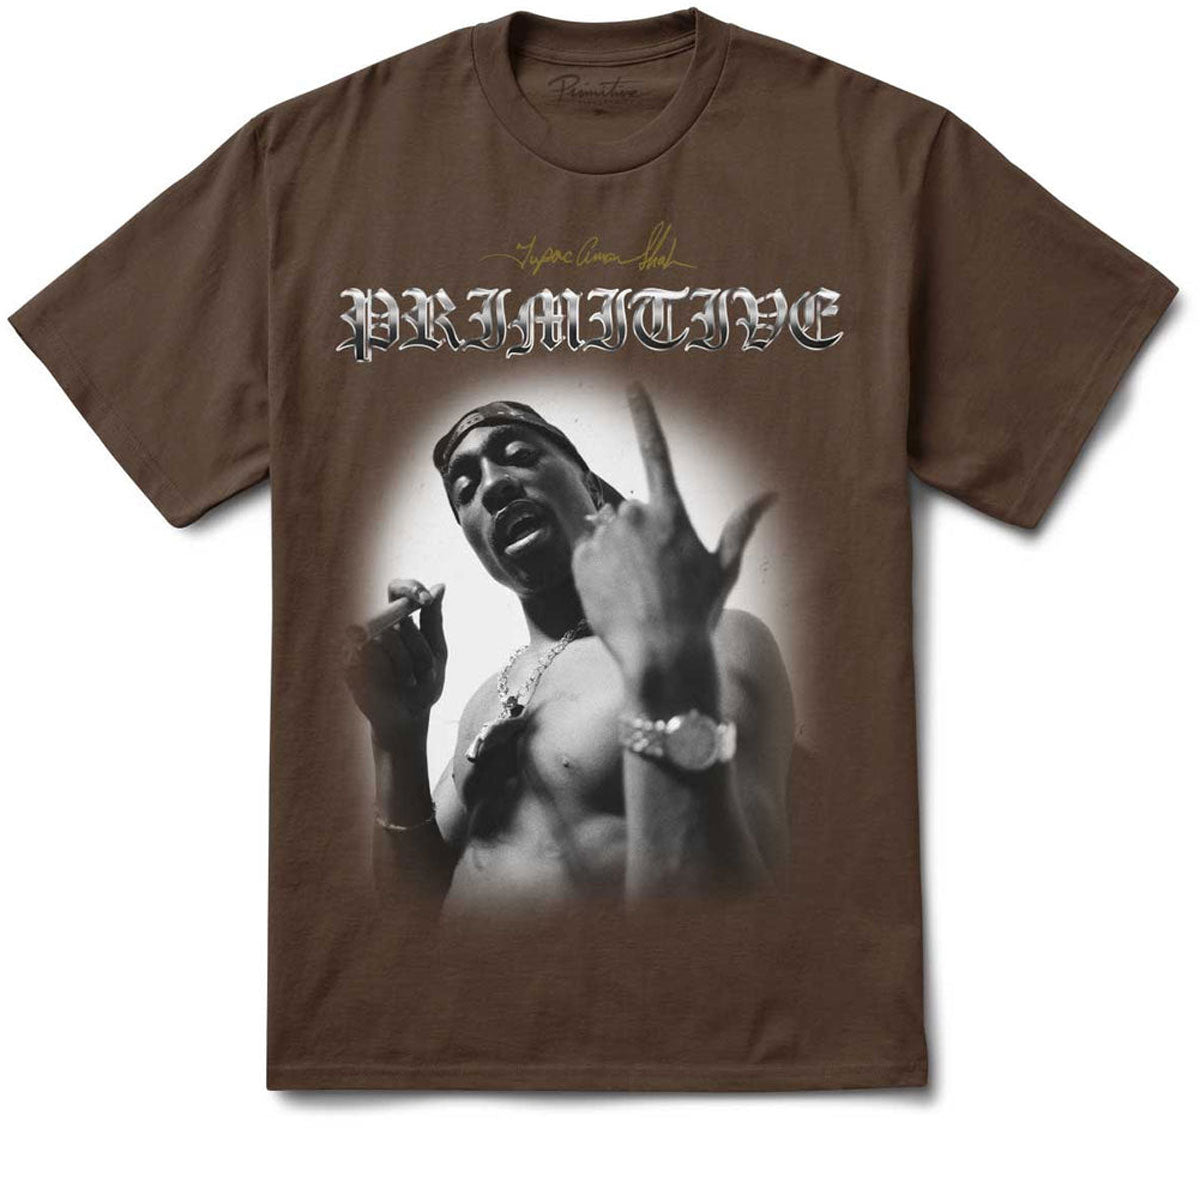 Primitive x Tupac One T-Shirt - Brown image 1